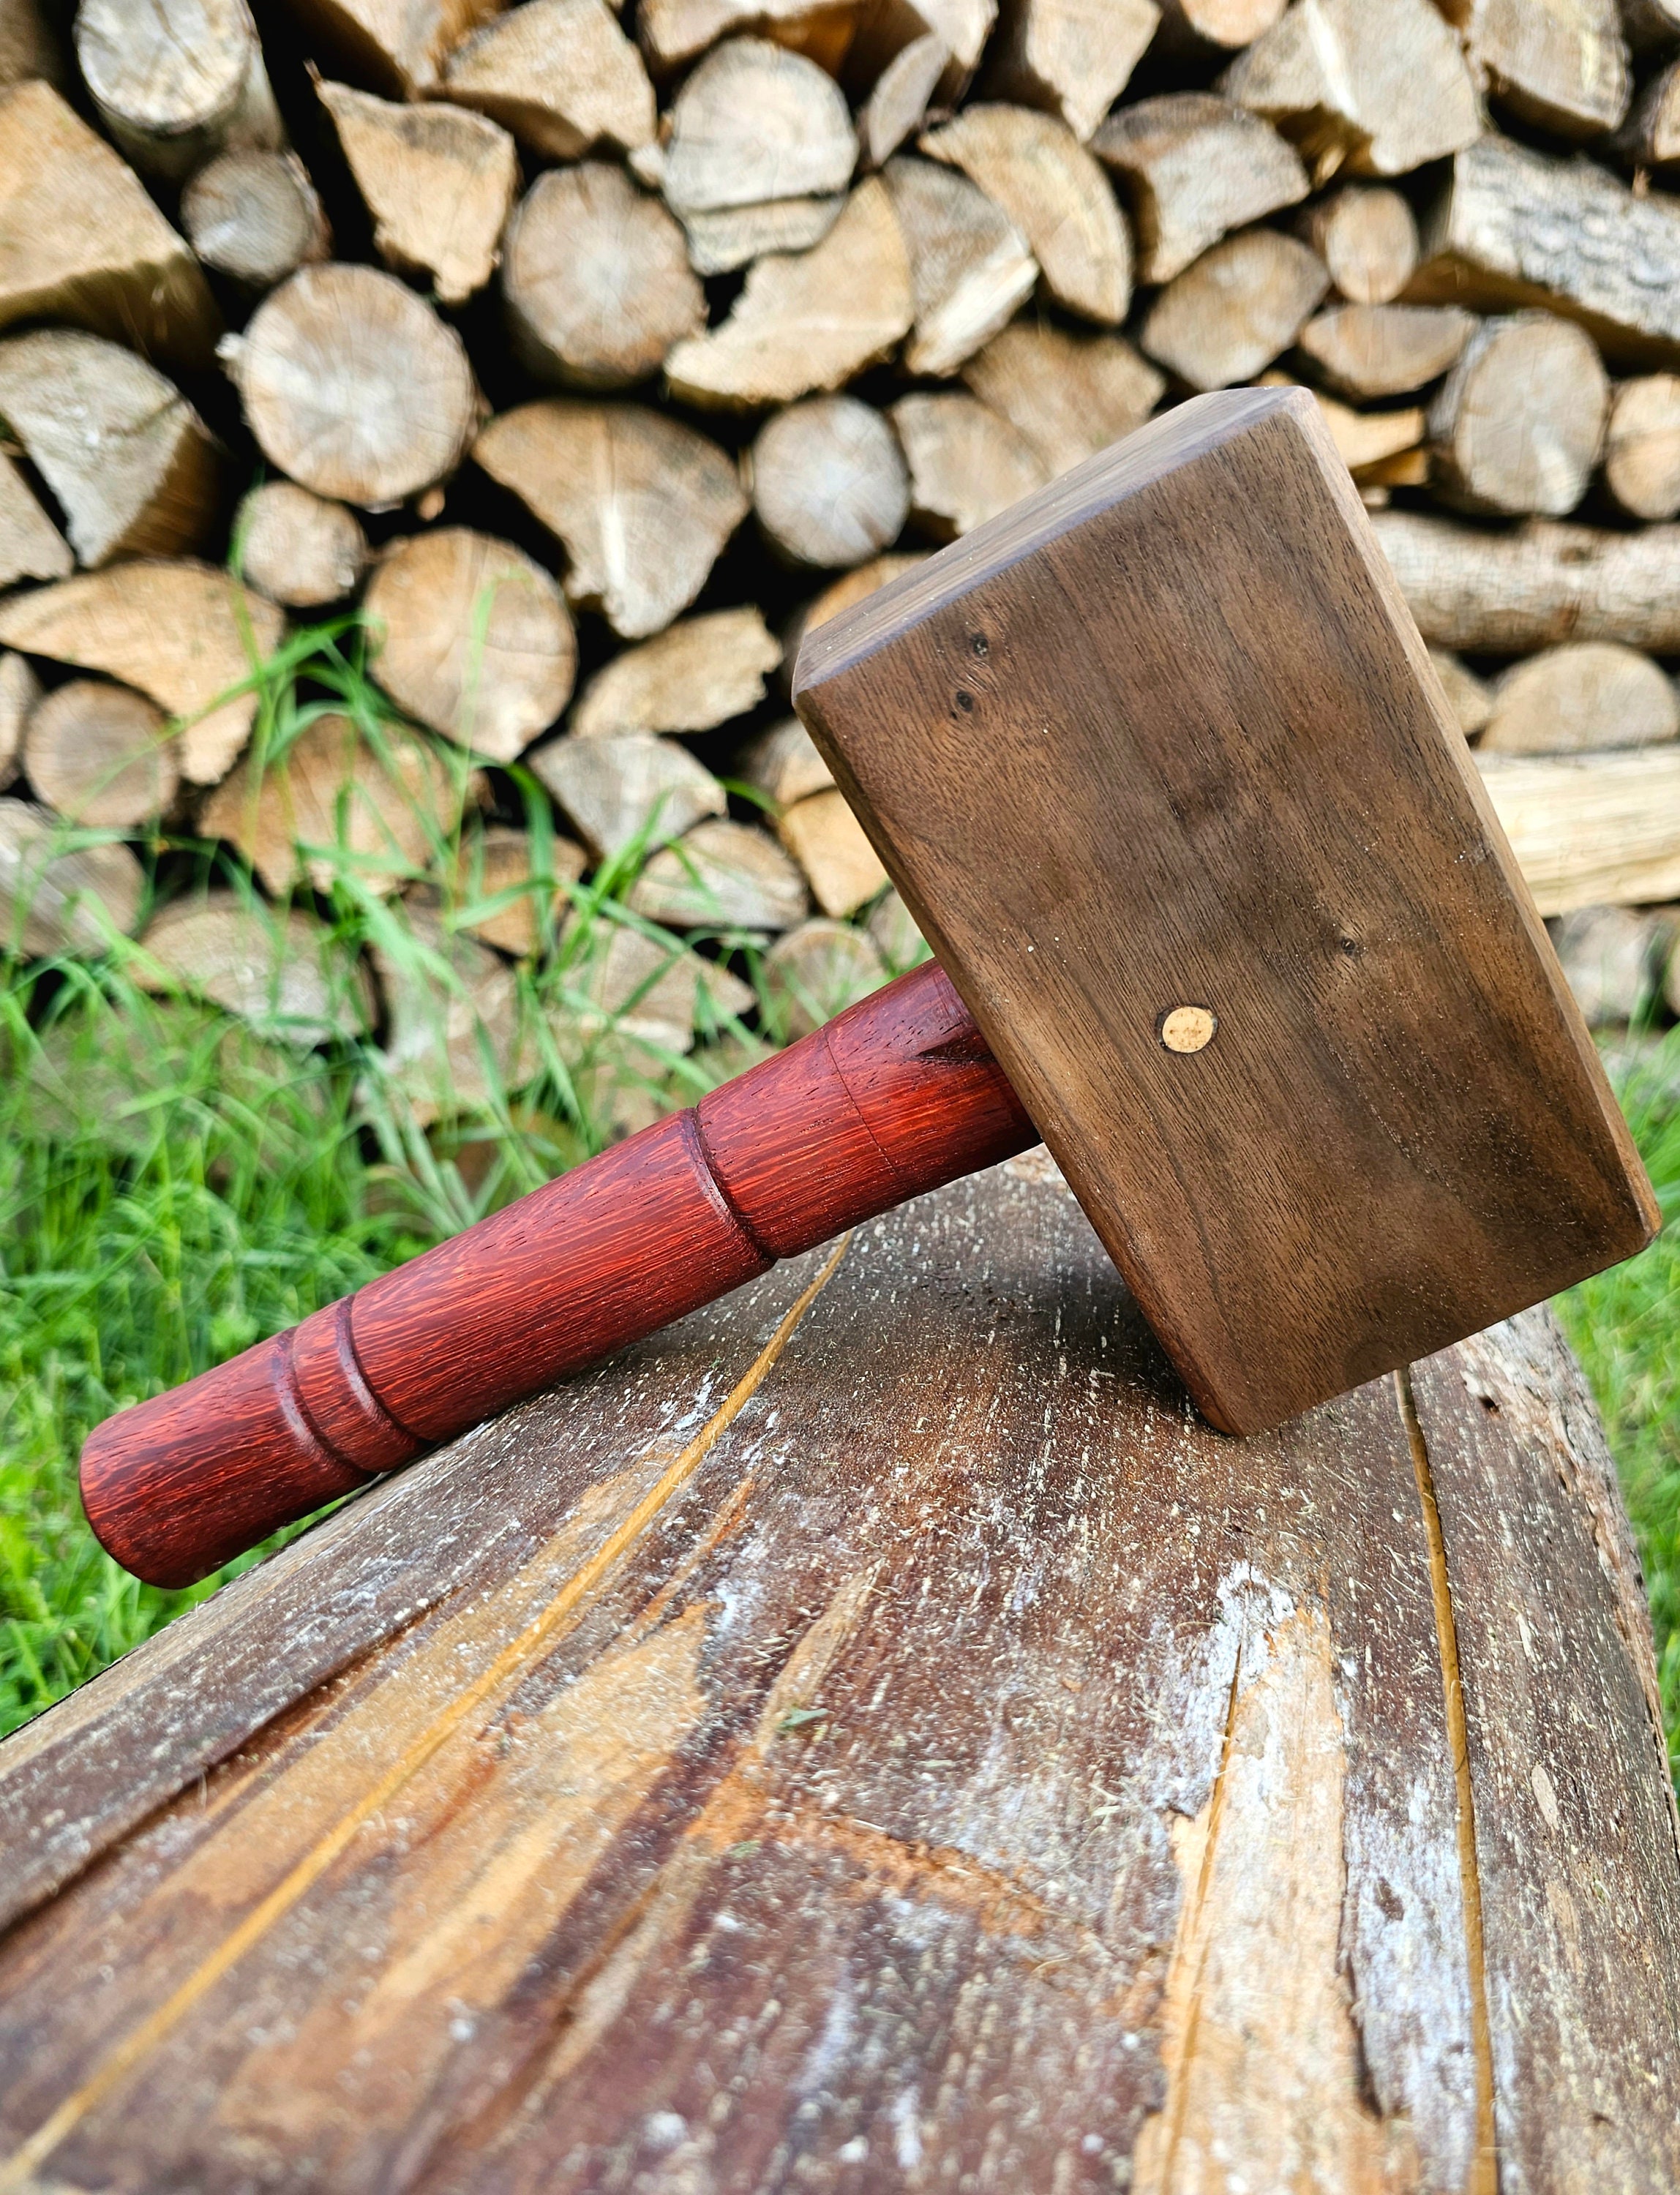 Wooden Mallet Craft Hammer Maul 300g for Leathercraft, Wood Carving,  Carpentry, and Jewellery Making